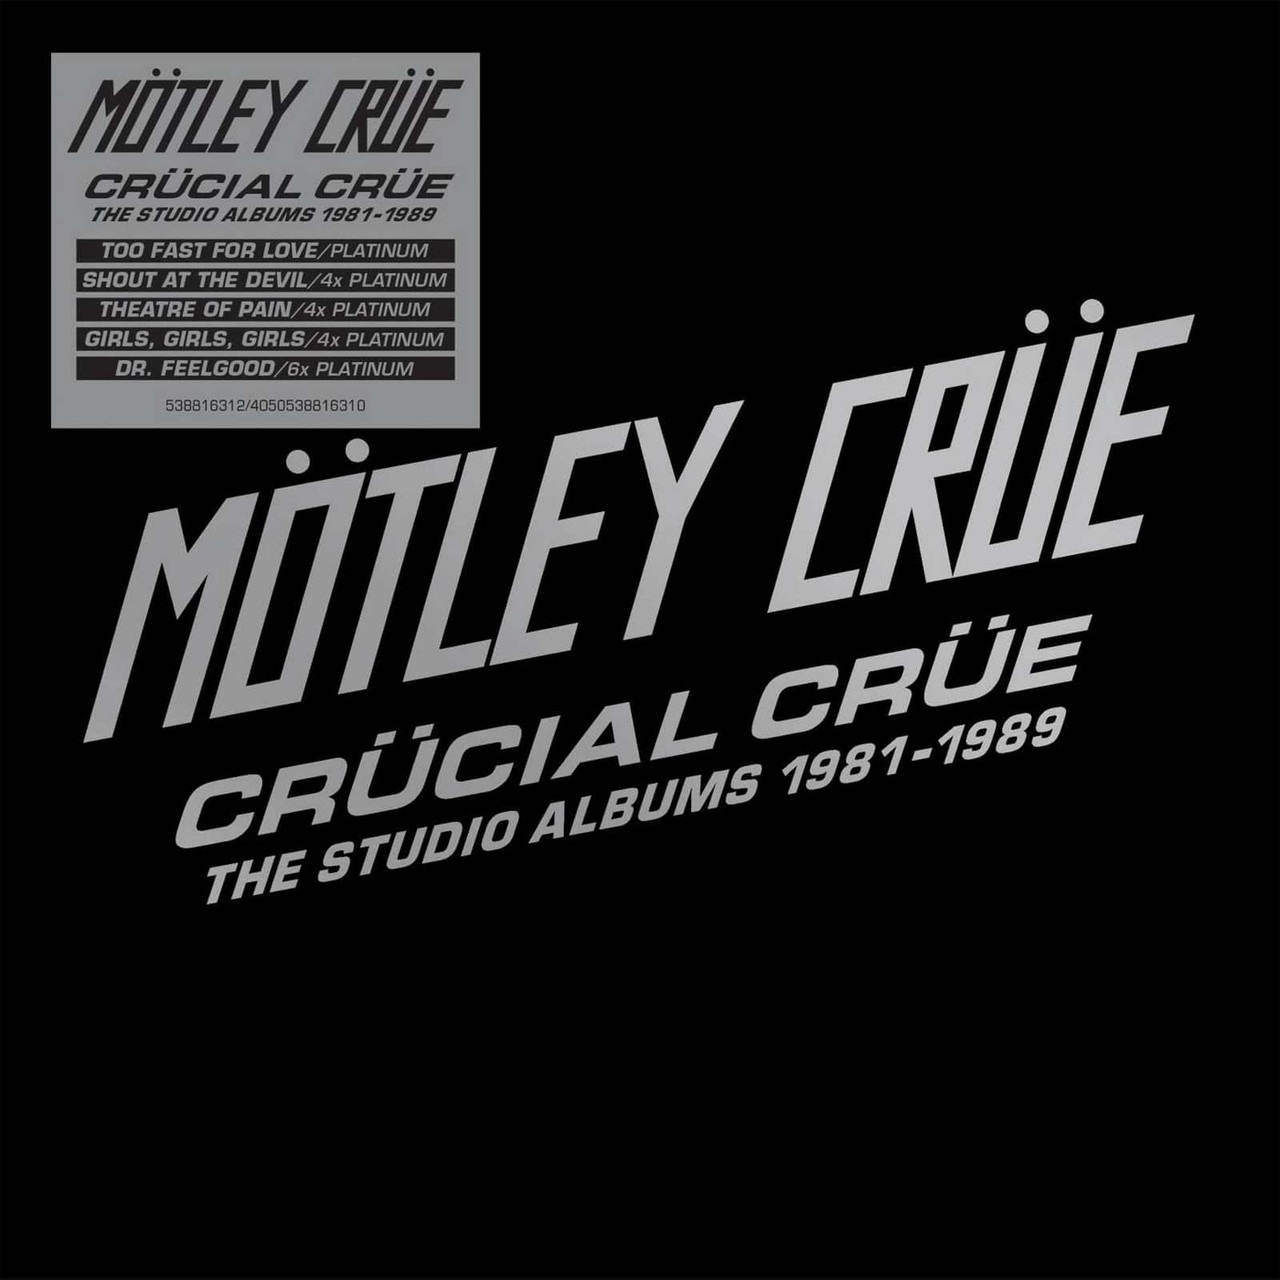 Live Wire by Motley Crue - Guitar Tab Play-Along - Guitar Instructor